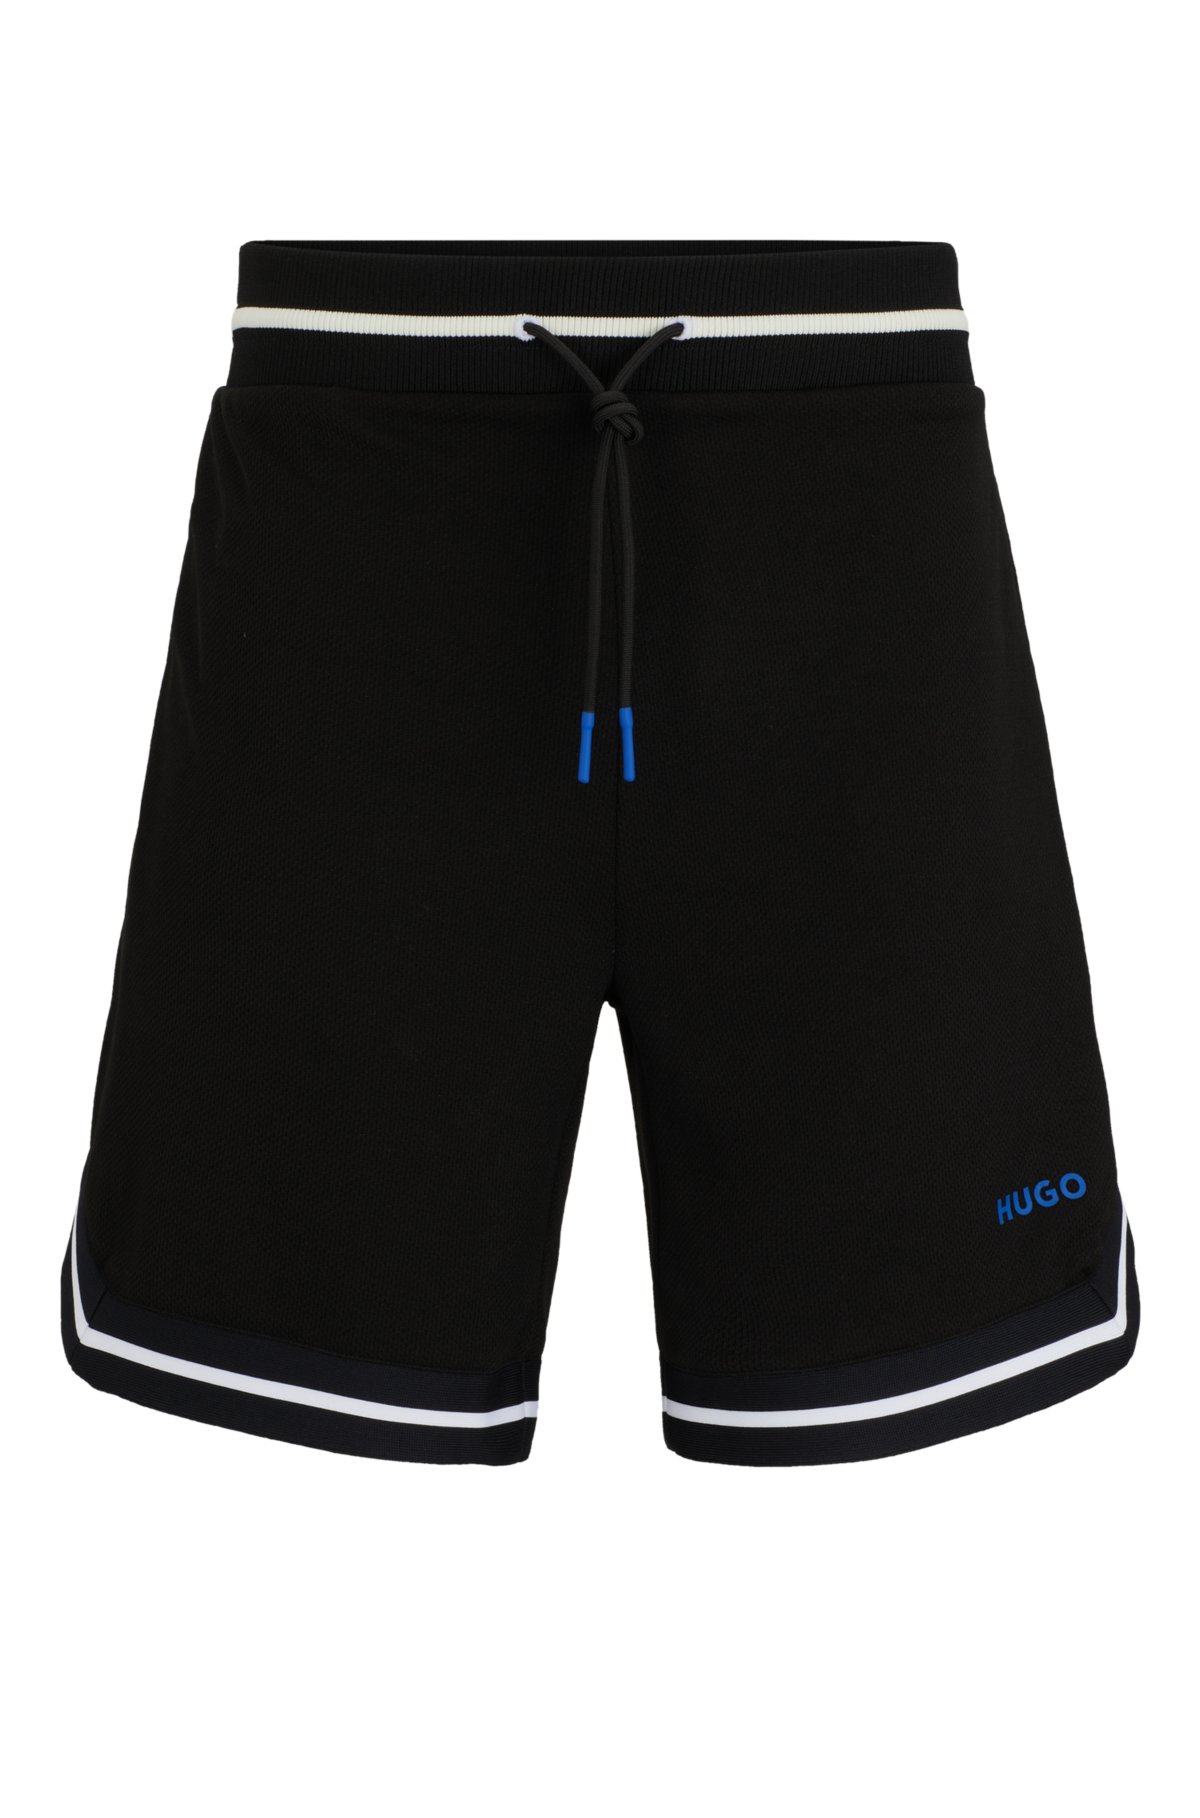 Mesh shorts with contrast logo and tape